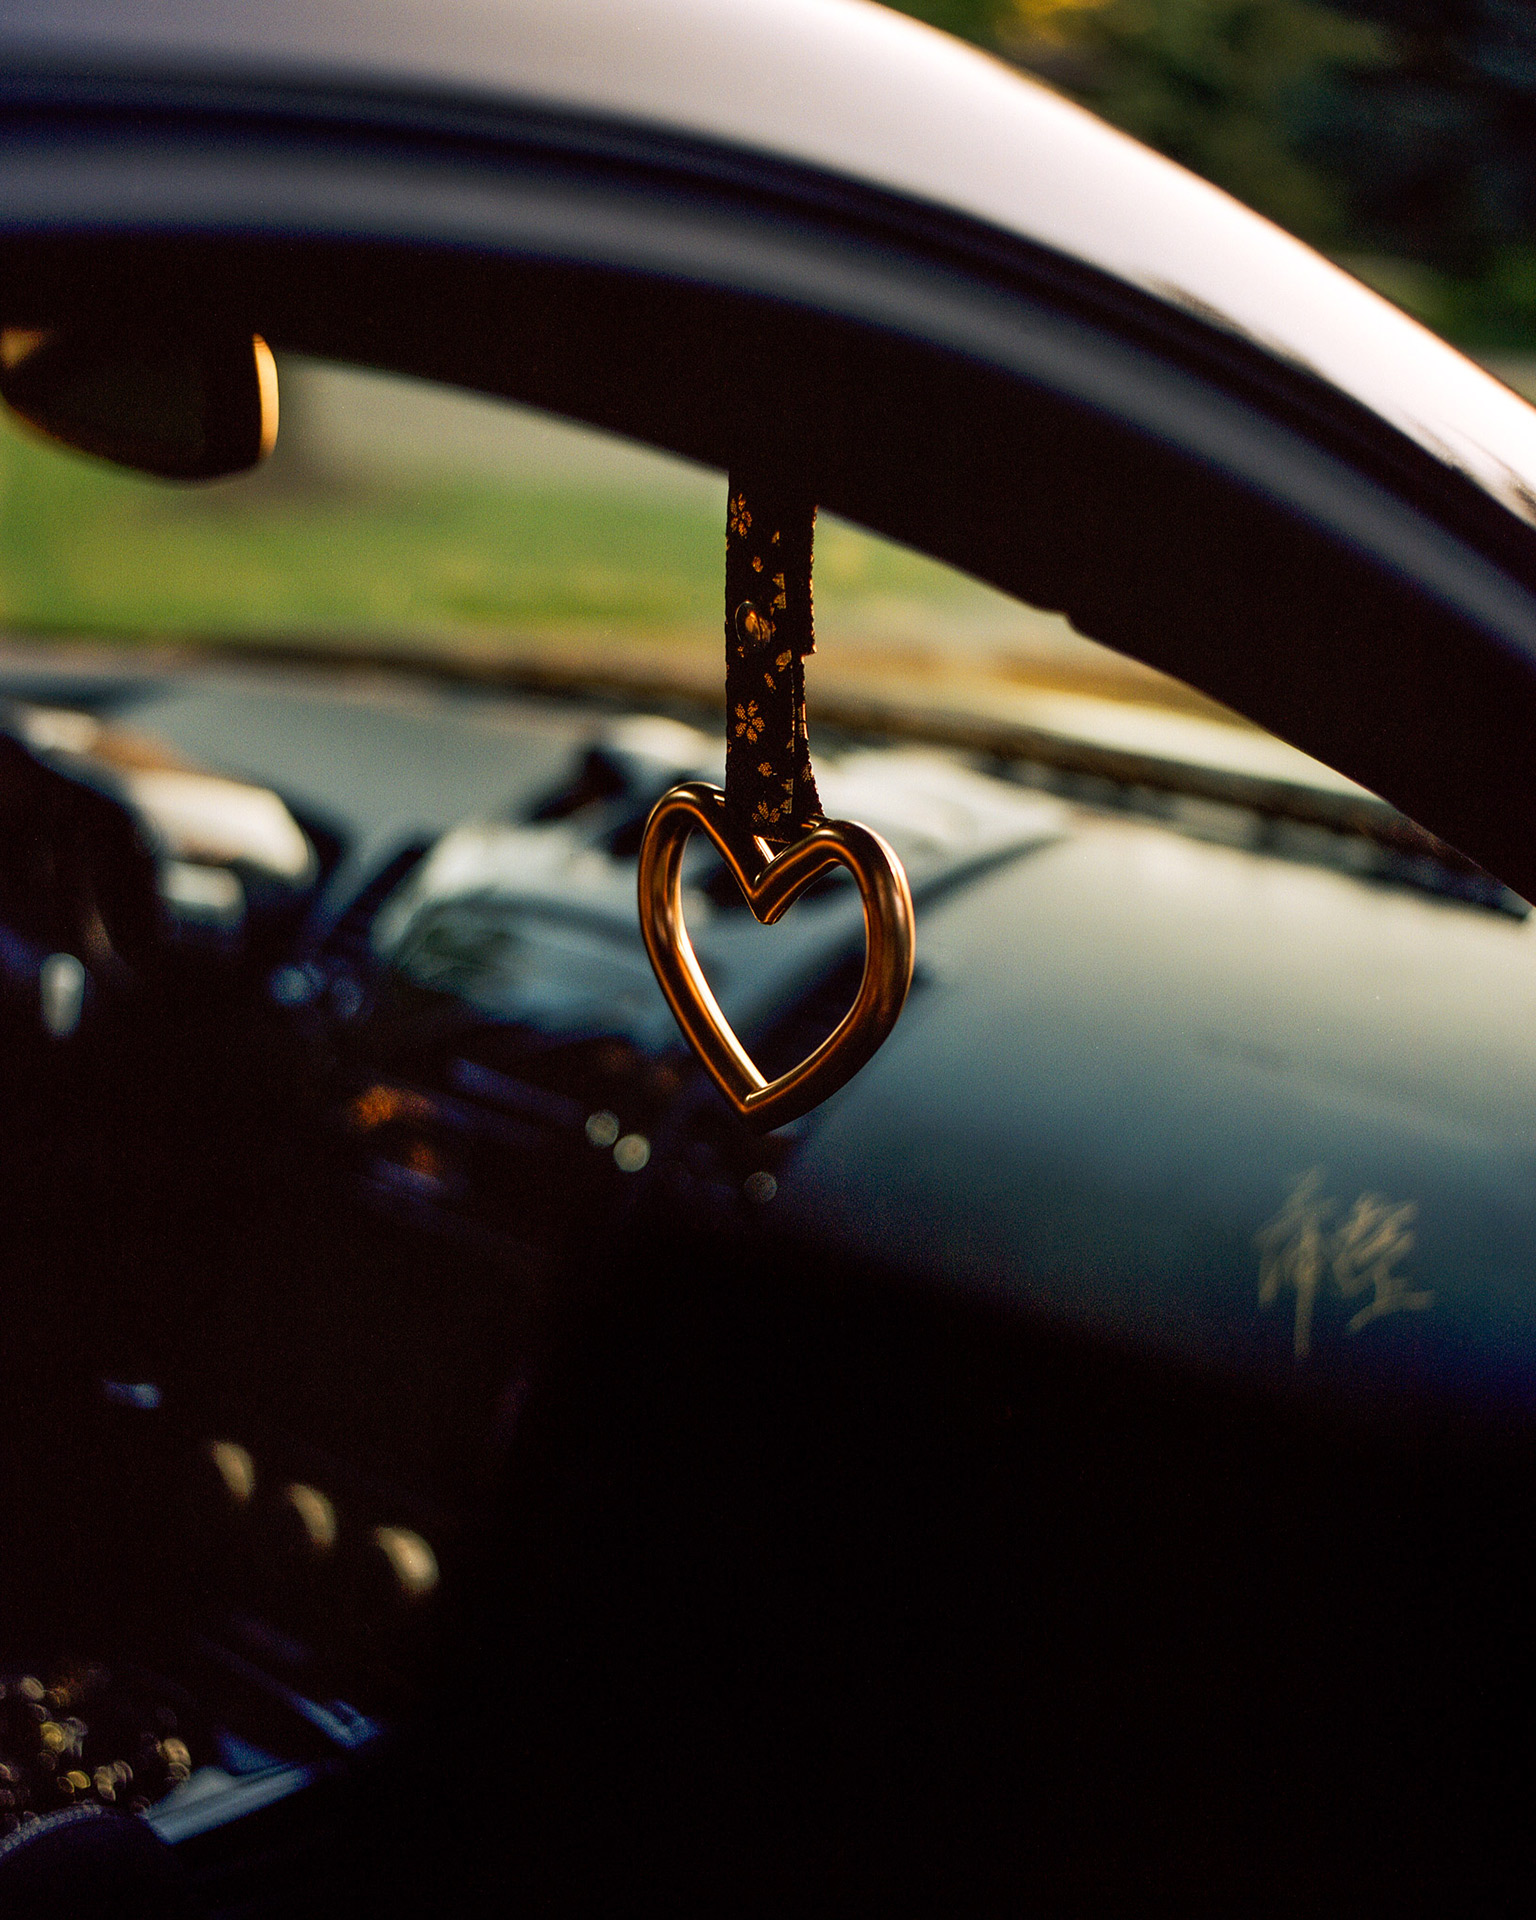 A Golden heart that is attached to the car.